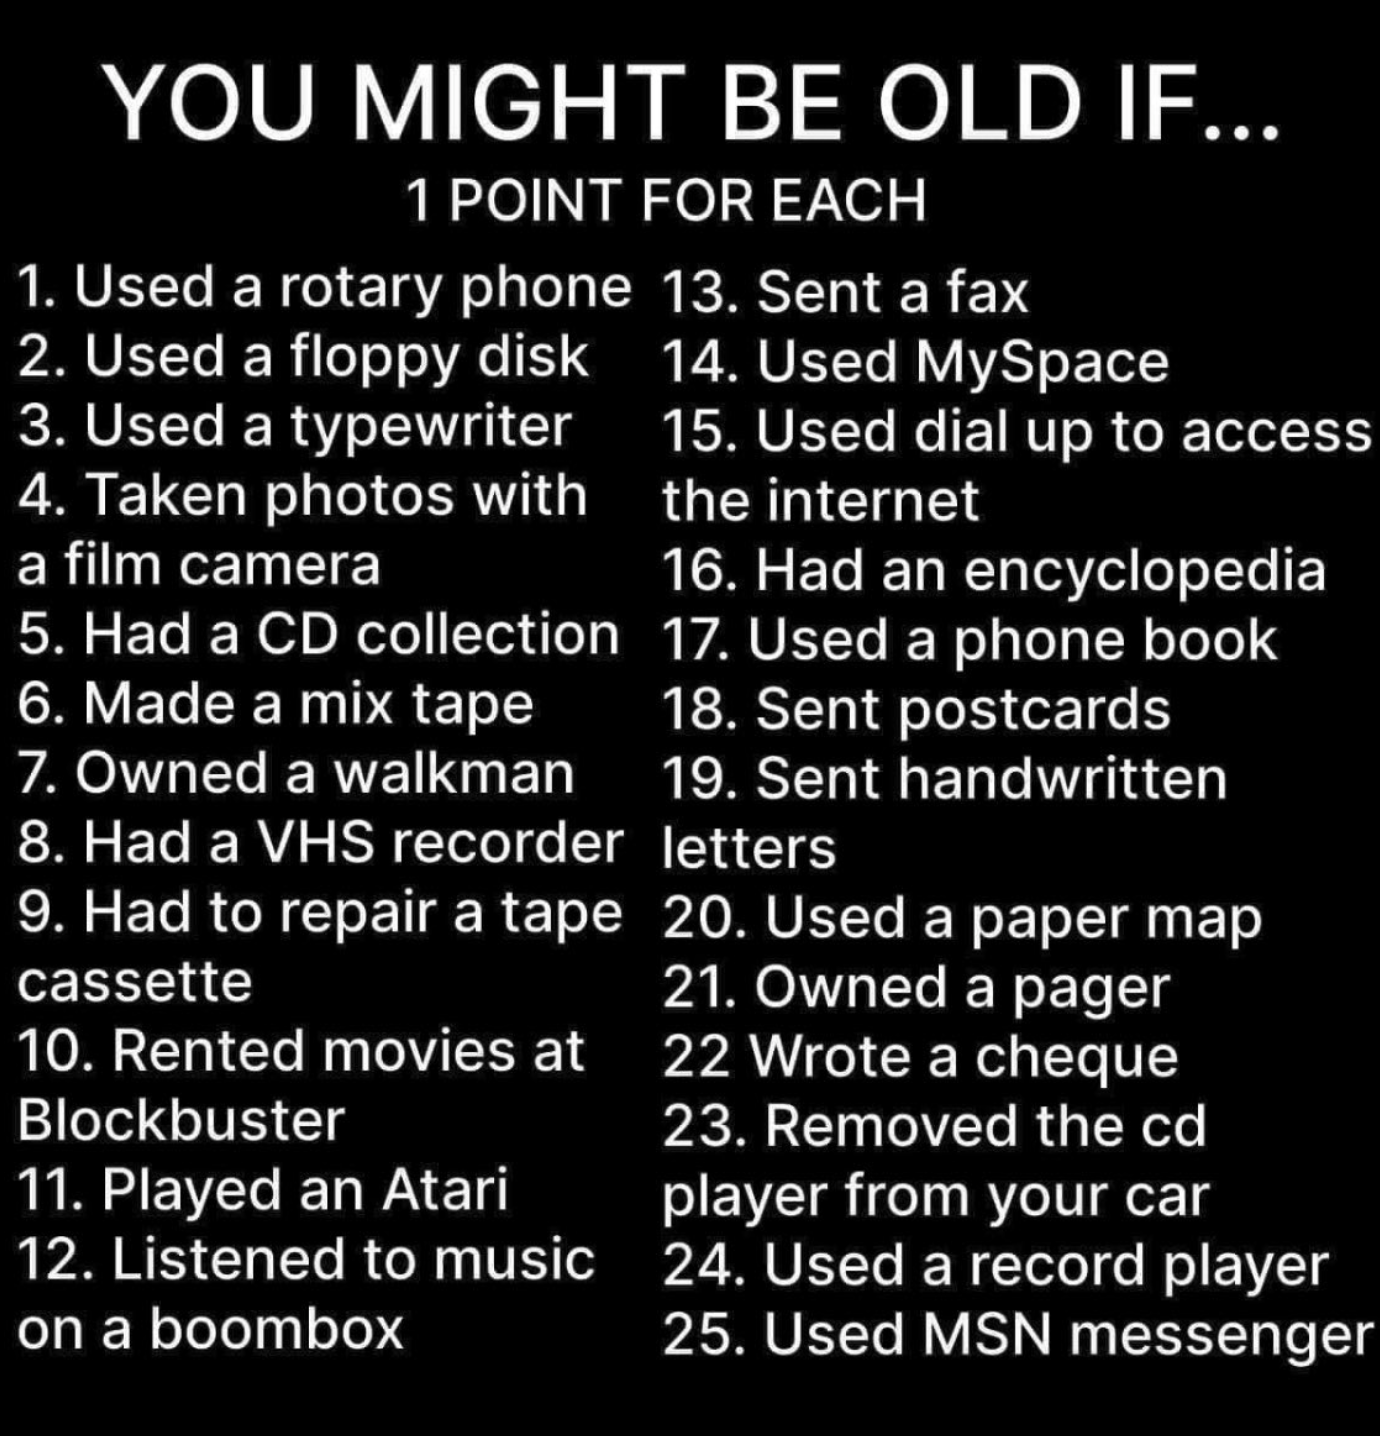 YOU MIGHT BE OLD IF... 1 POINT FOR EACH

1. Used a rotary phone 13, Sent a fax 2. Used a floppy disk  14. Used MySpace 3. Used a typewriter 15, Used dial up to access 4. Taken photos with  the internet a film camera 16. Had an encyclopedia 5. Had a CD collection 17. Used a phone book 6. Made a mix tape 18. Sent postcards 7.0wned a walkman  19. Sent handwritten 8. Had a VHS recorder |etters 9. Had to repair a tape 20. Used a paper map cassette 21. Owned a pager 10. Rented movies at 22 Wrote a cheque Blockbuster 23. Removed the cd 11. Played an Atari player from your car 12. Listened to music 24. Used a record player on a boombox 25. Used MSN messenger